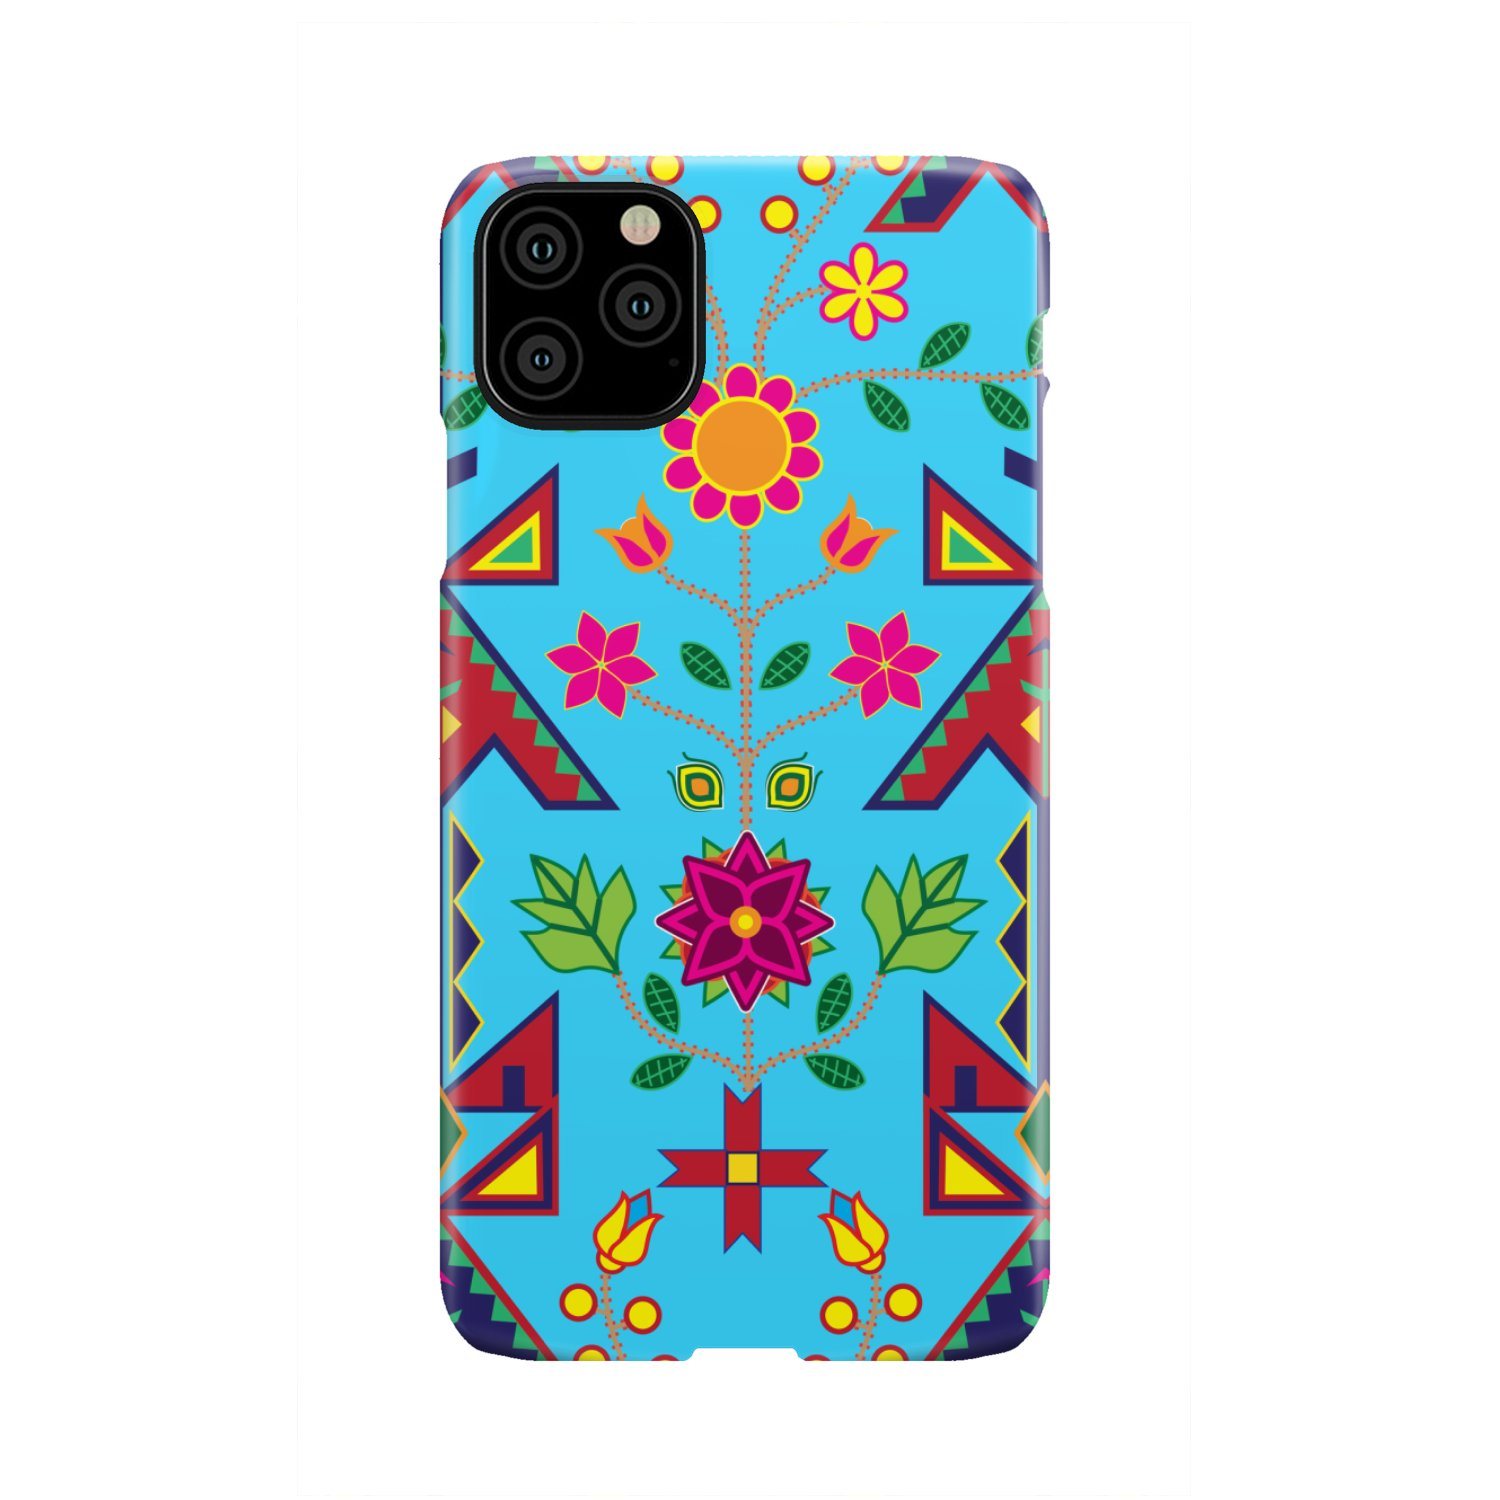 Geometric Floral Spring - Sky Blue Phone Case Phone Case wc-fulfillment iPhone 11 Pro Max 